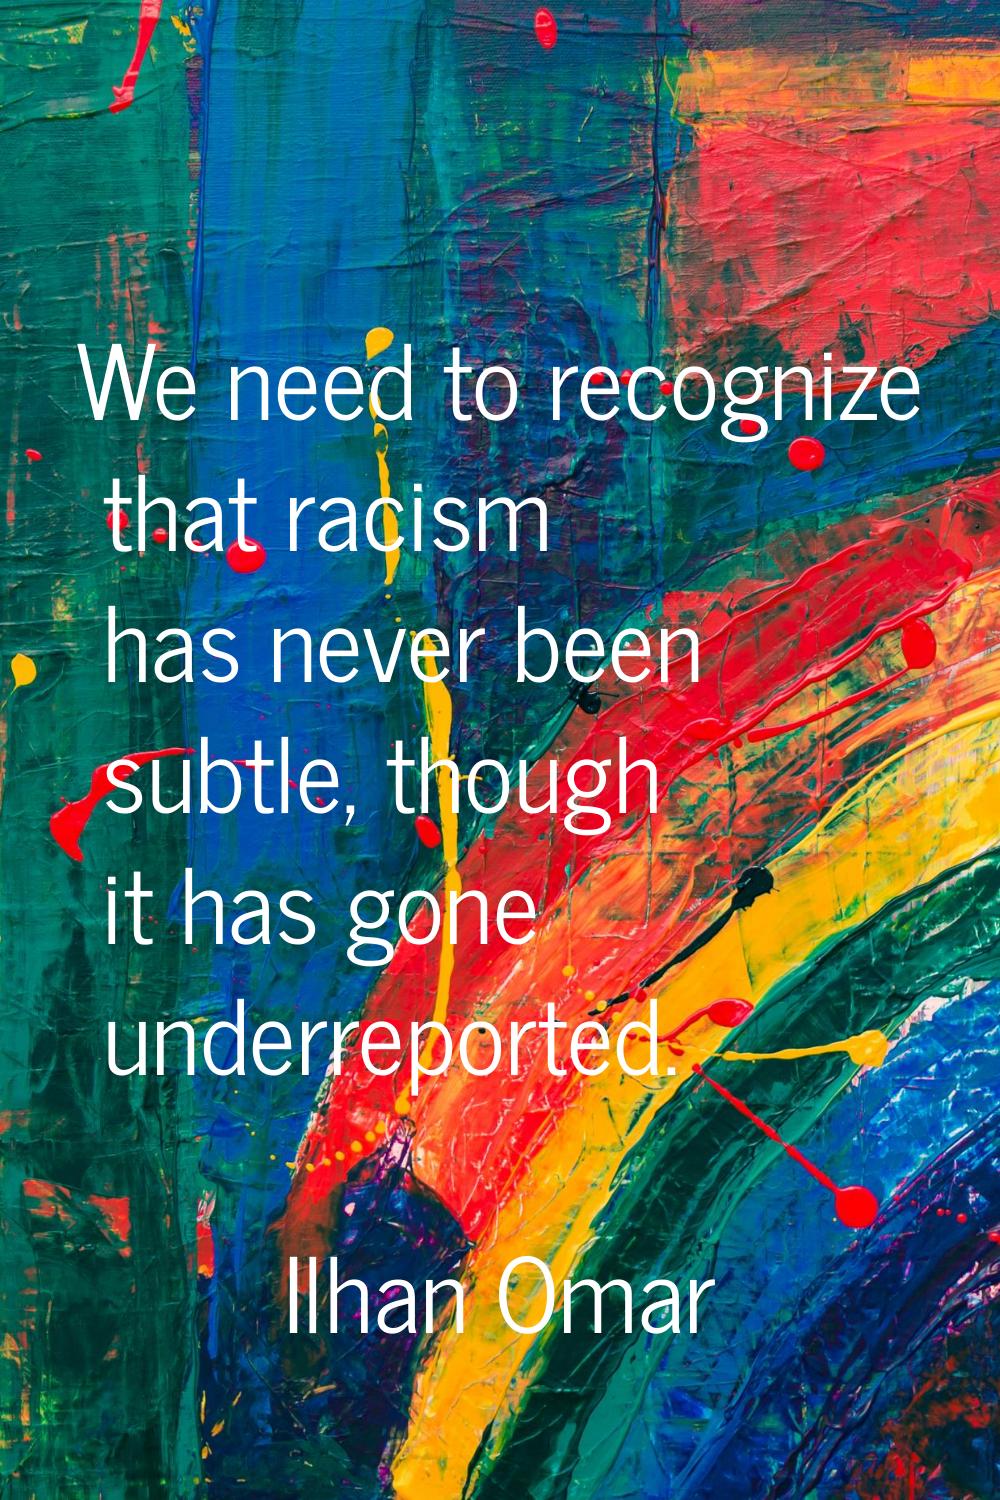 We need to recognize that racism has never been subtle, though it has gone underreported.